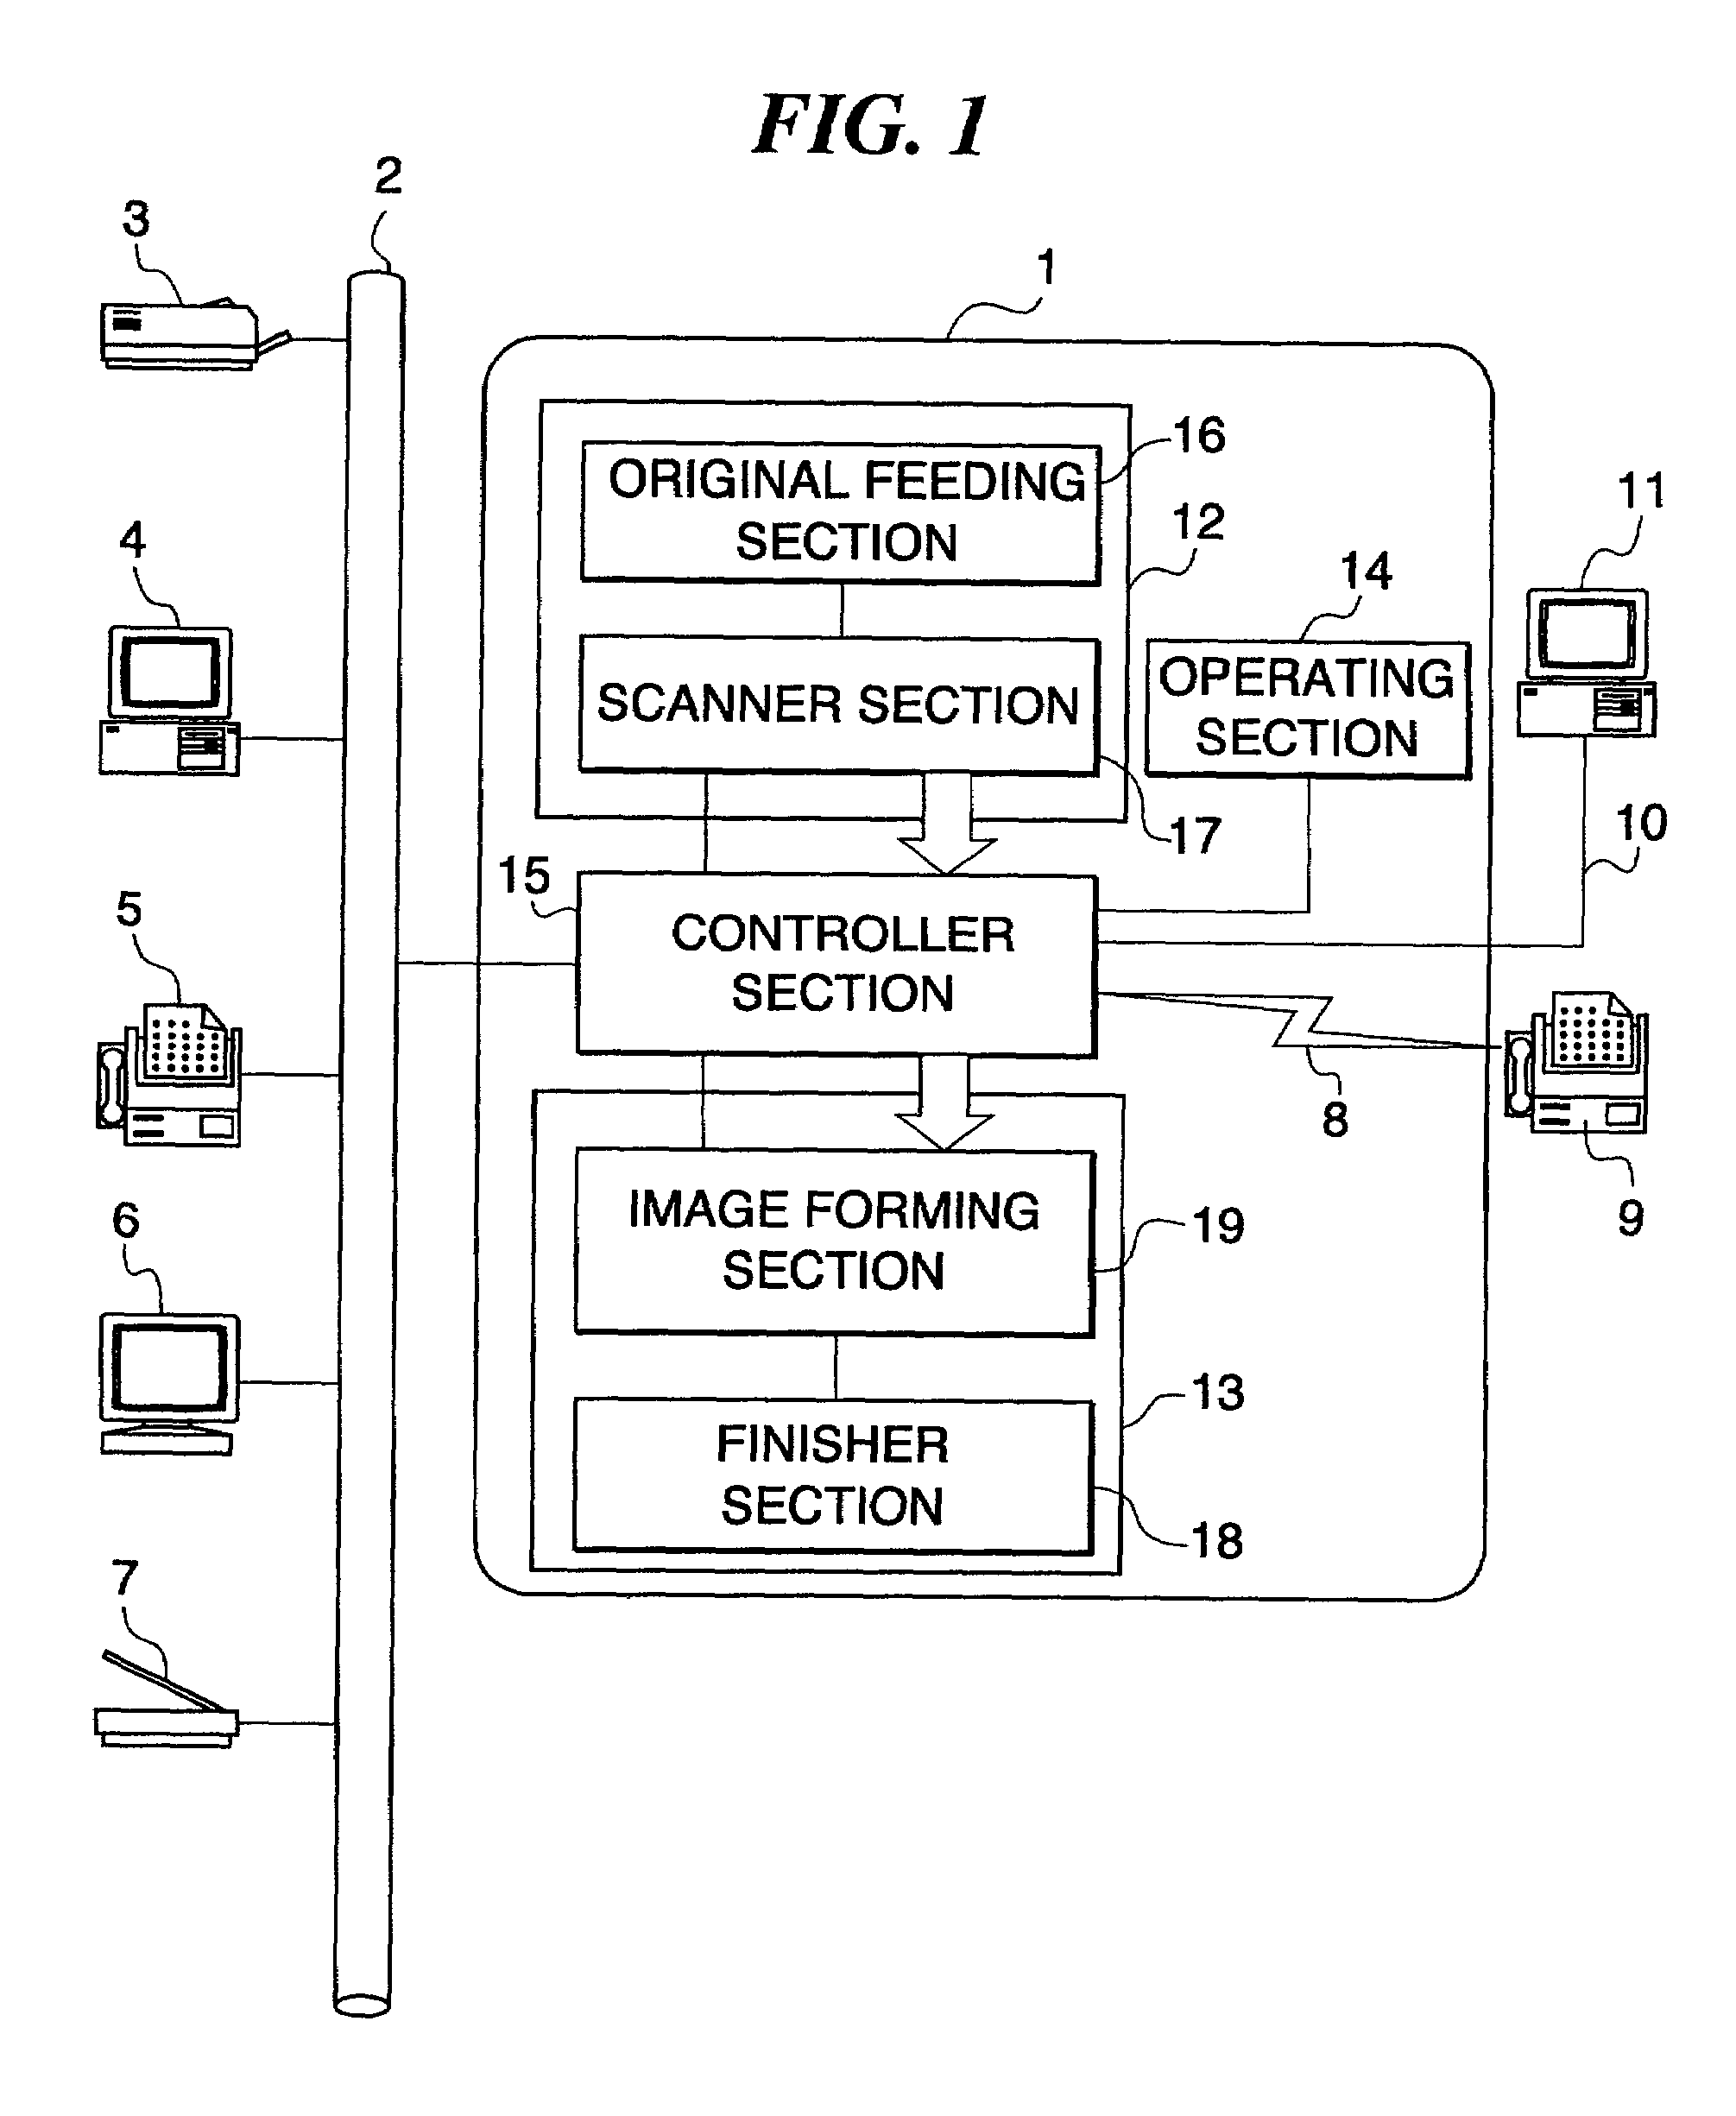 Image forming apparatus and control method for rotating image data based on sheet type and orientation